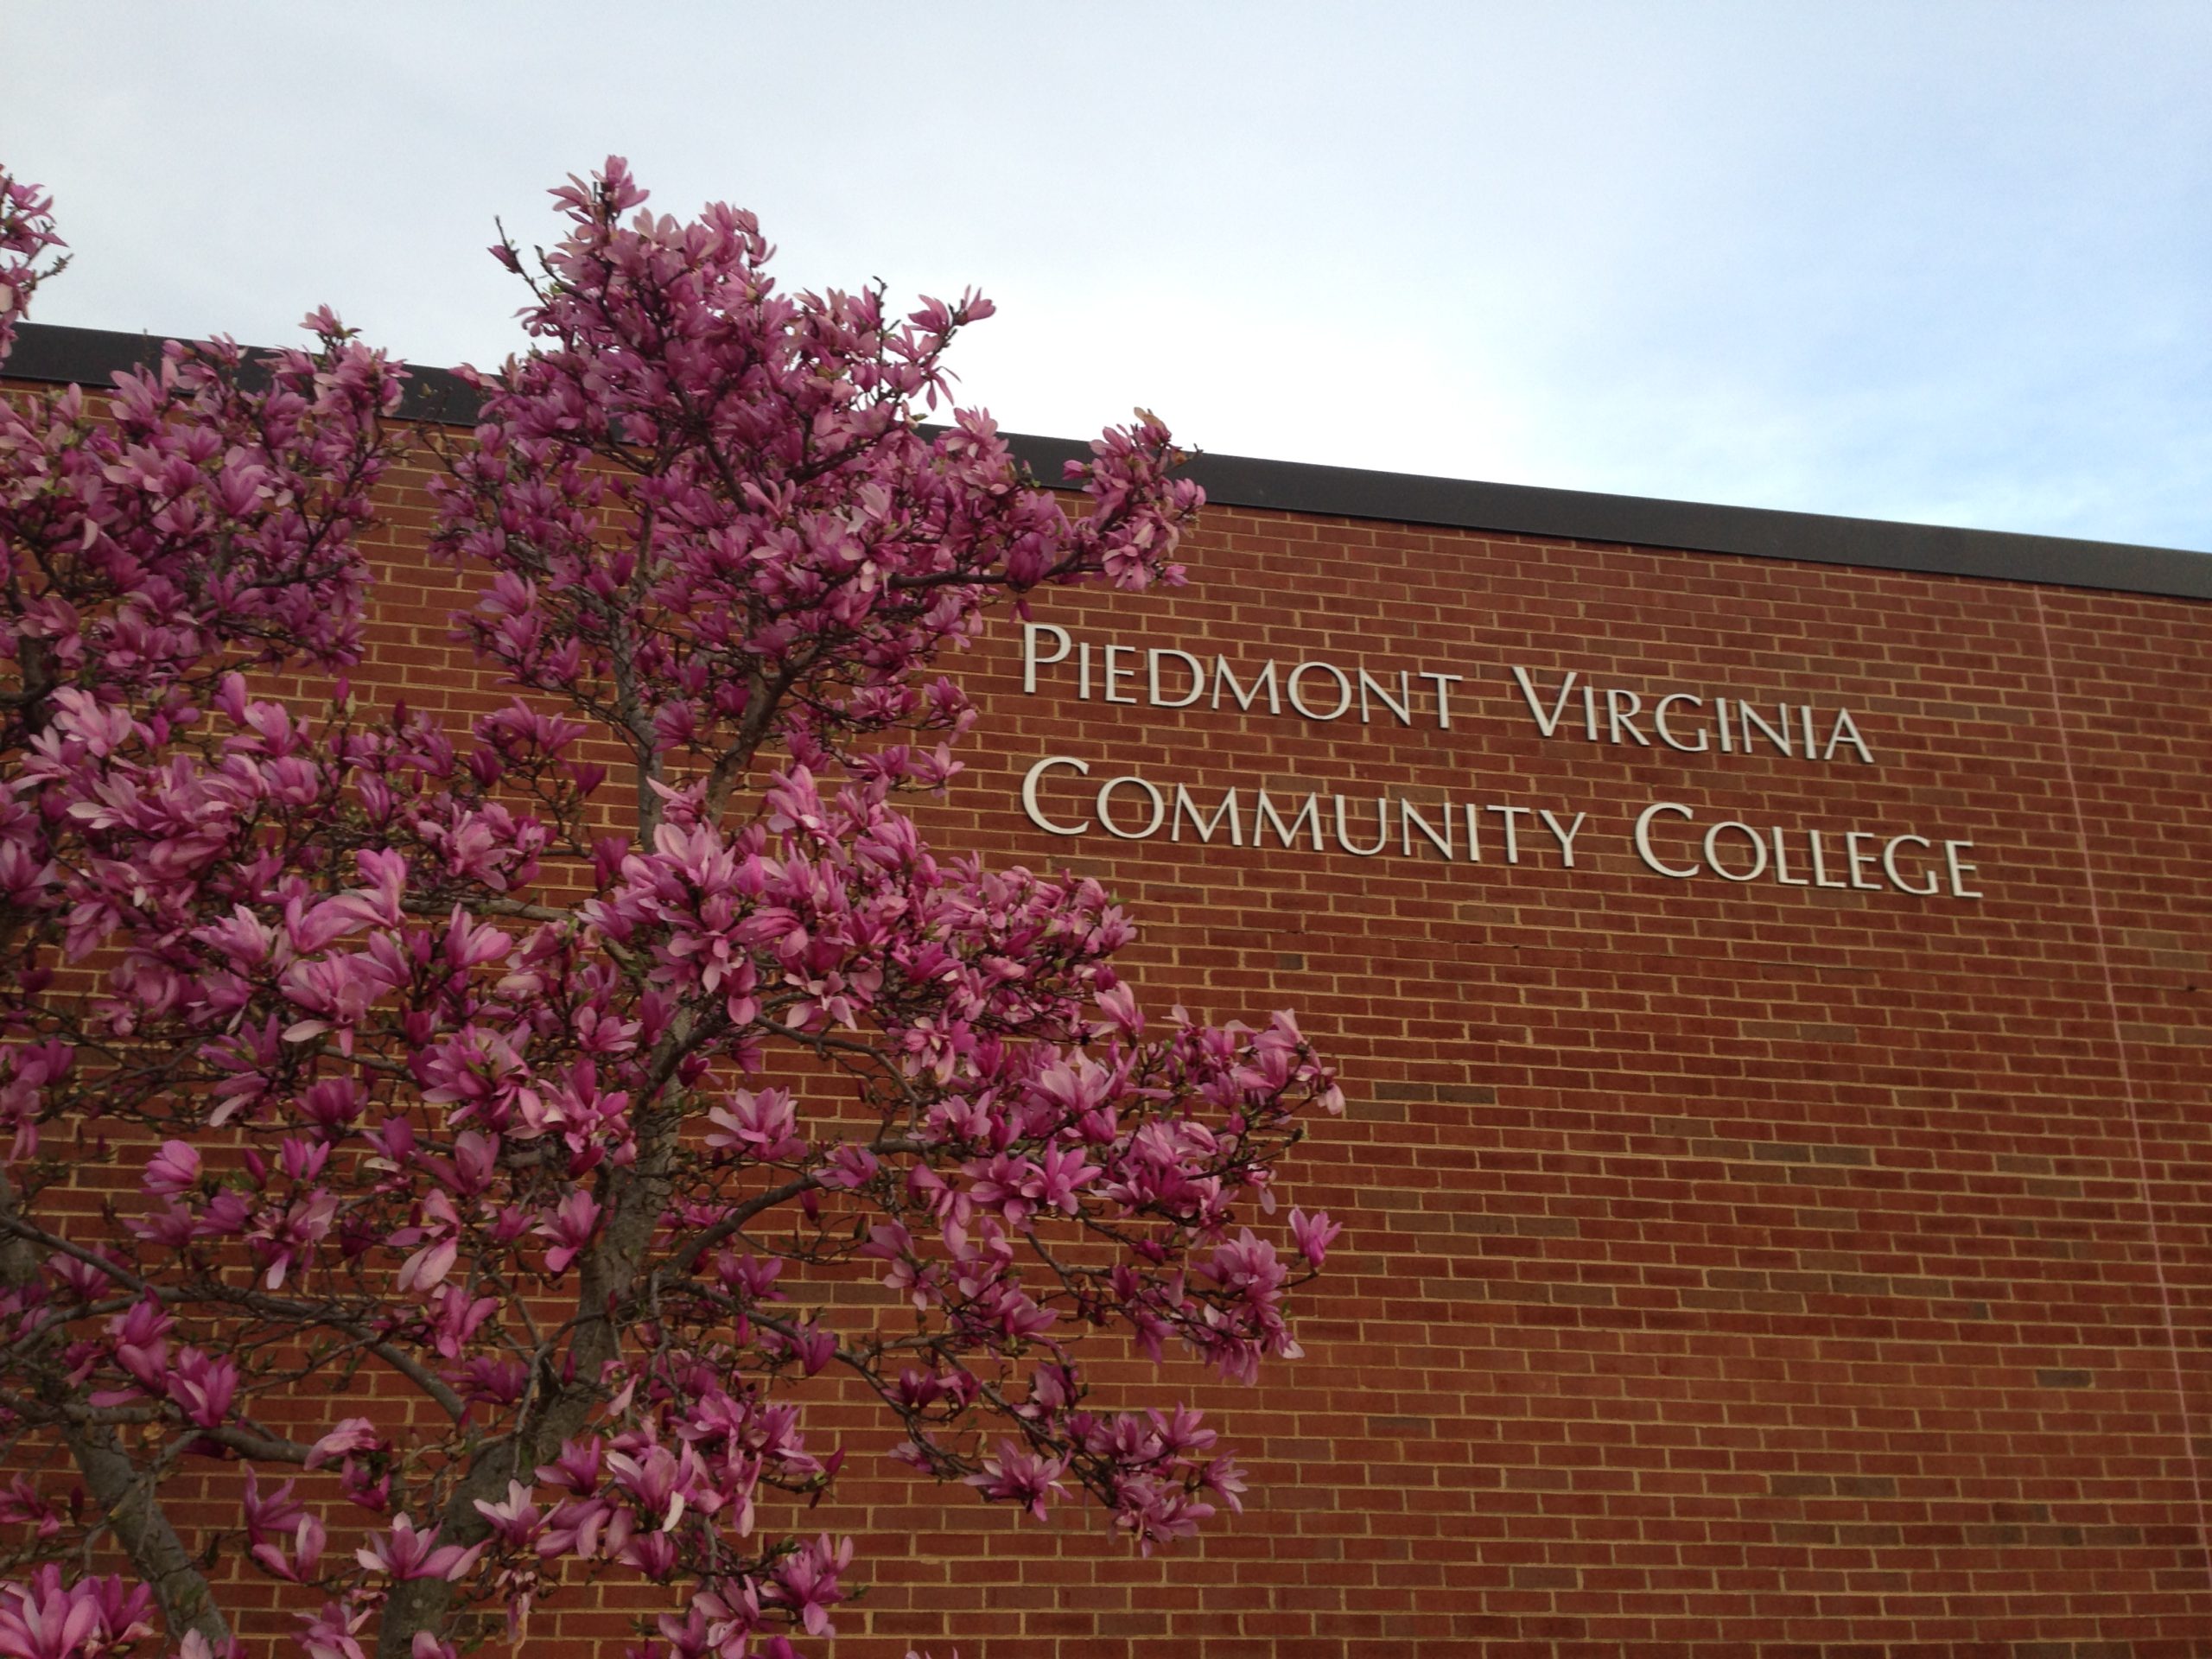 The outside of PVCC with pink flowers blooming.